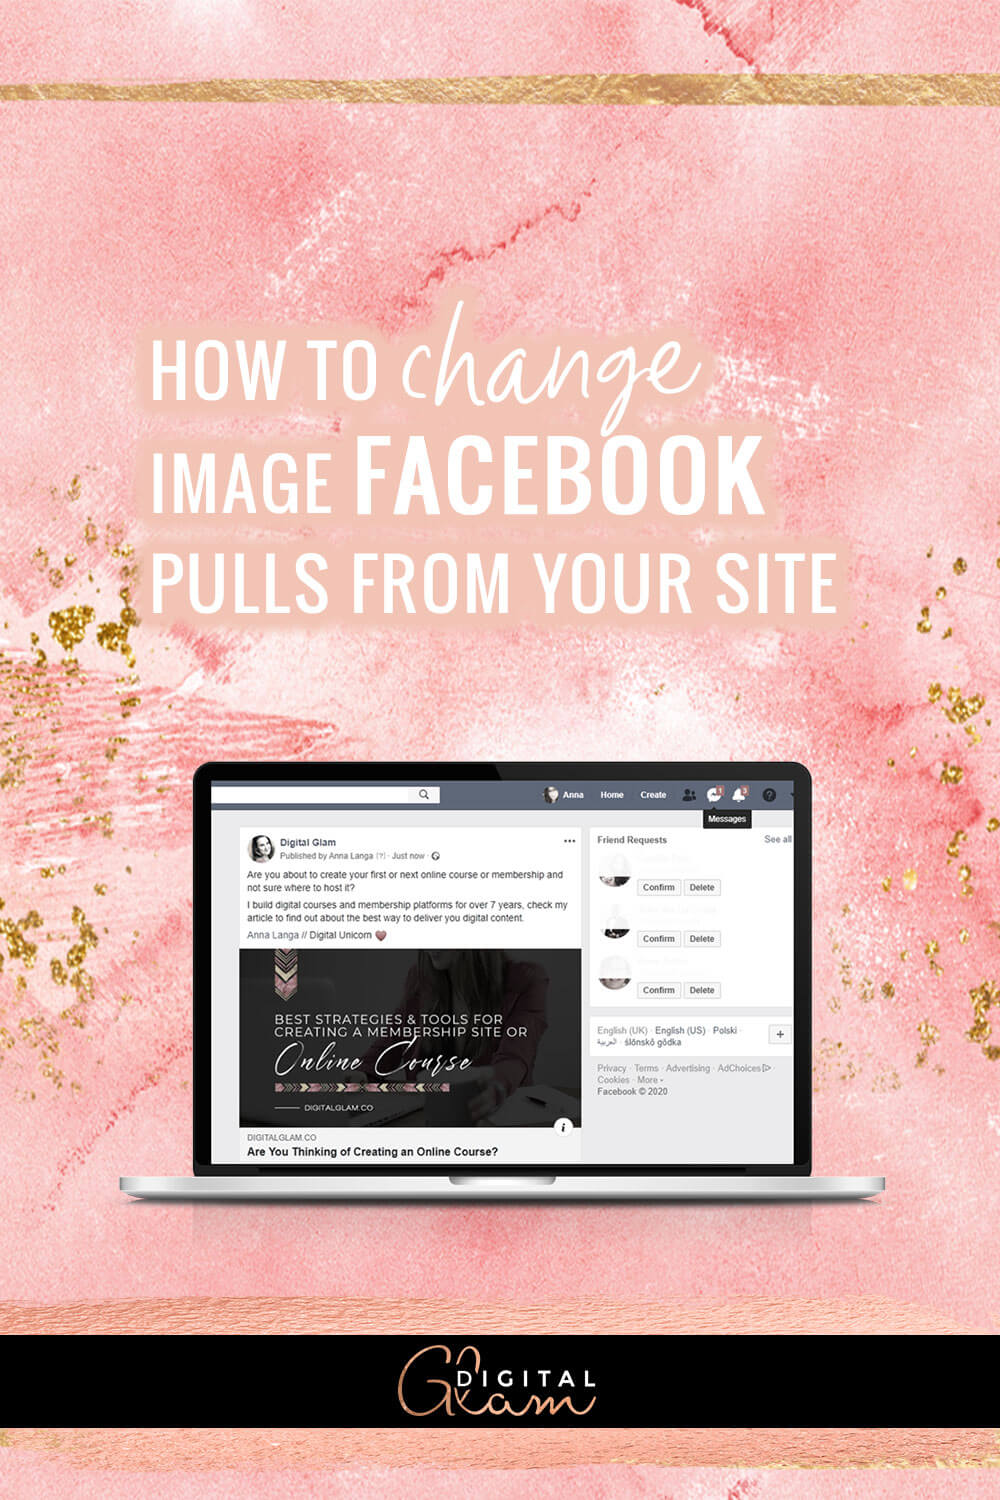 how to change image Facebook pulls from your site